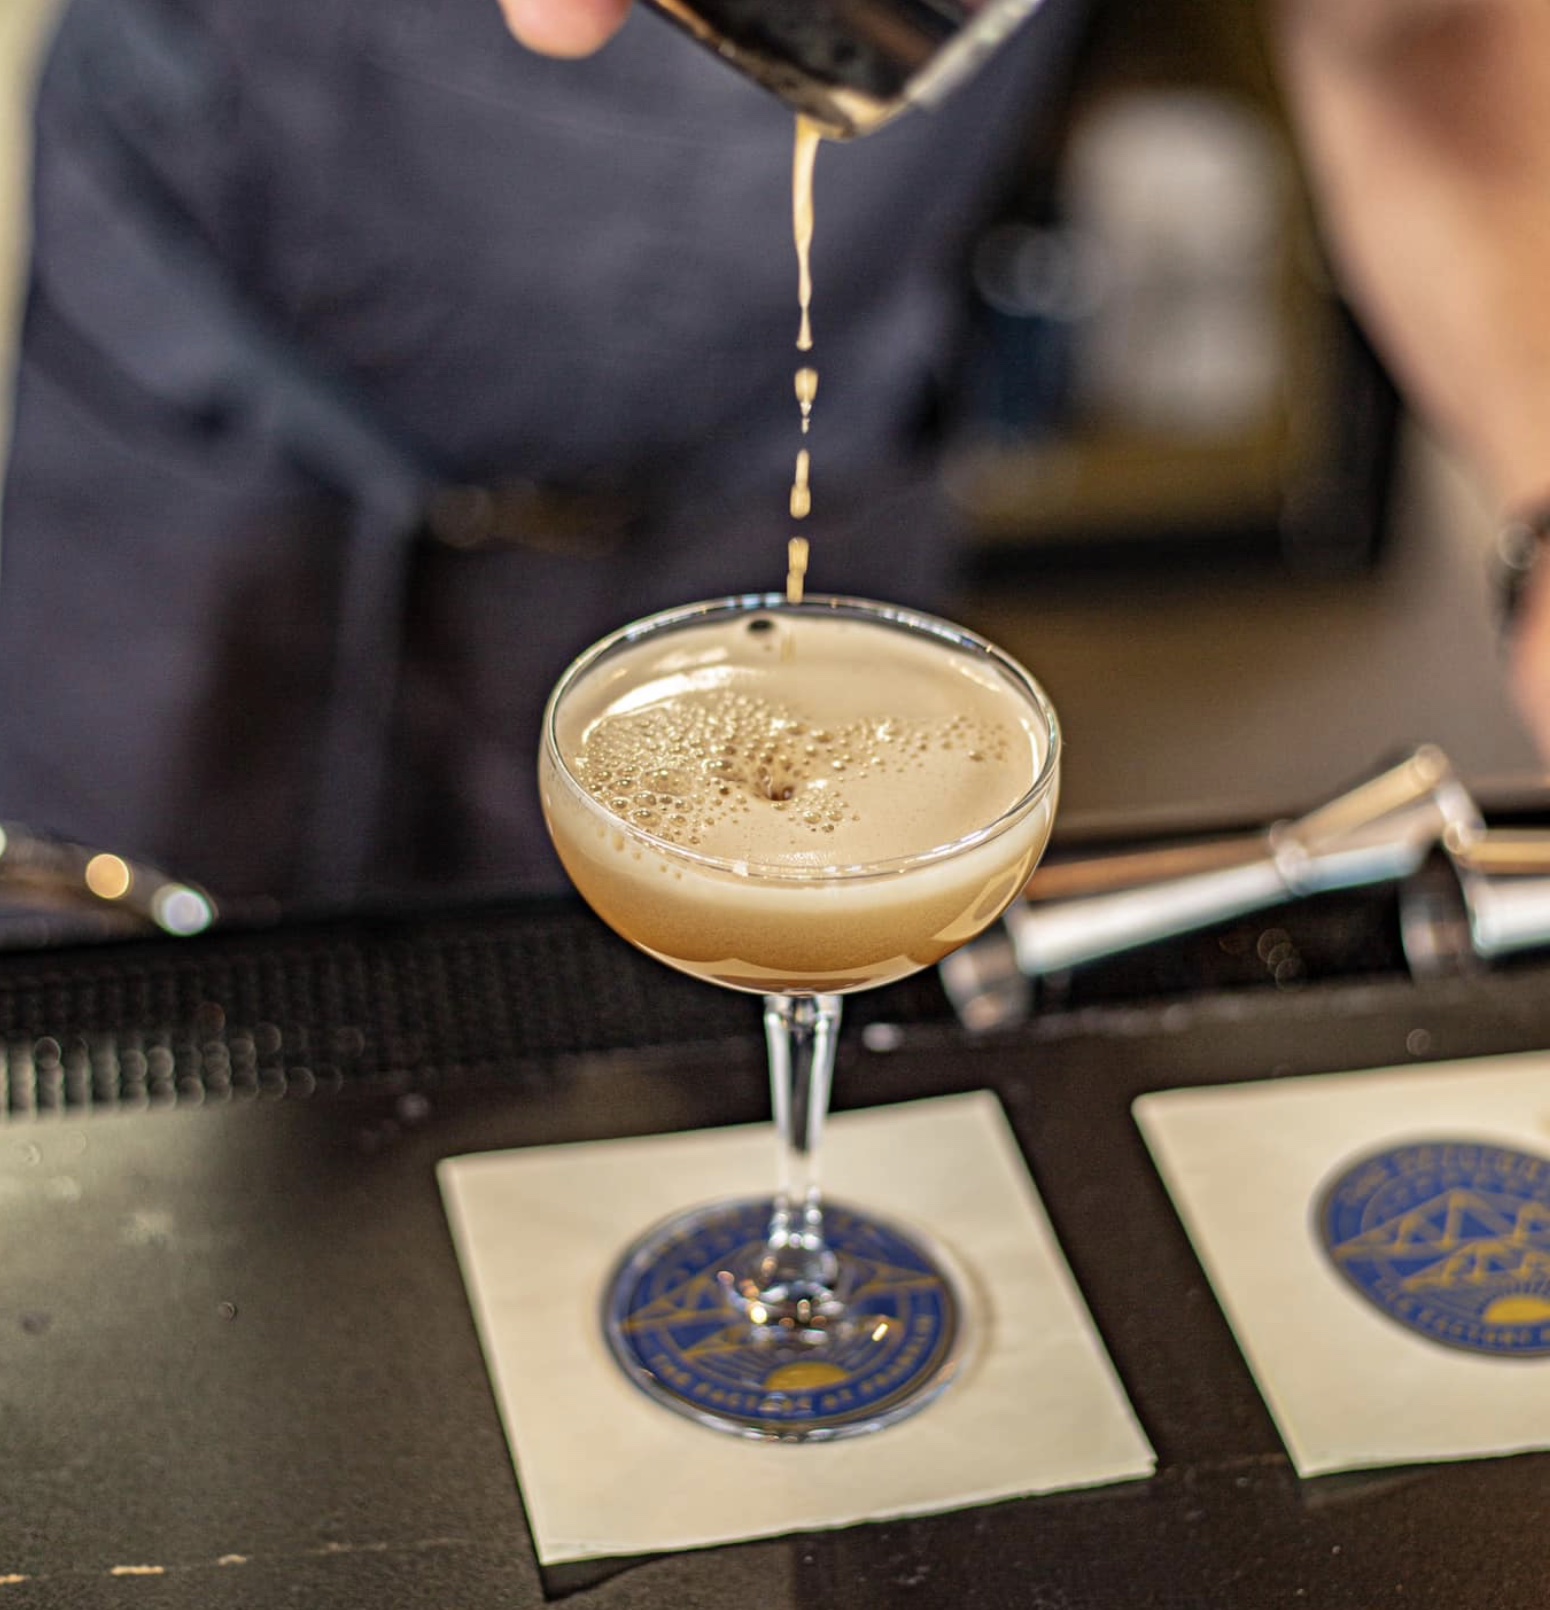 Mixology Class- Learn to Make Espresso Martinis at the Skylight Bar Downtown Franklin